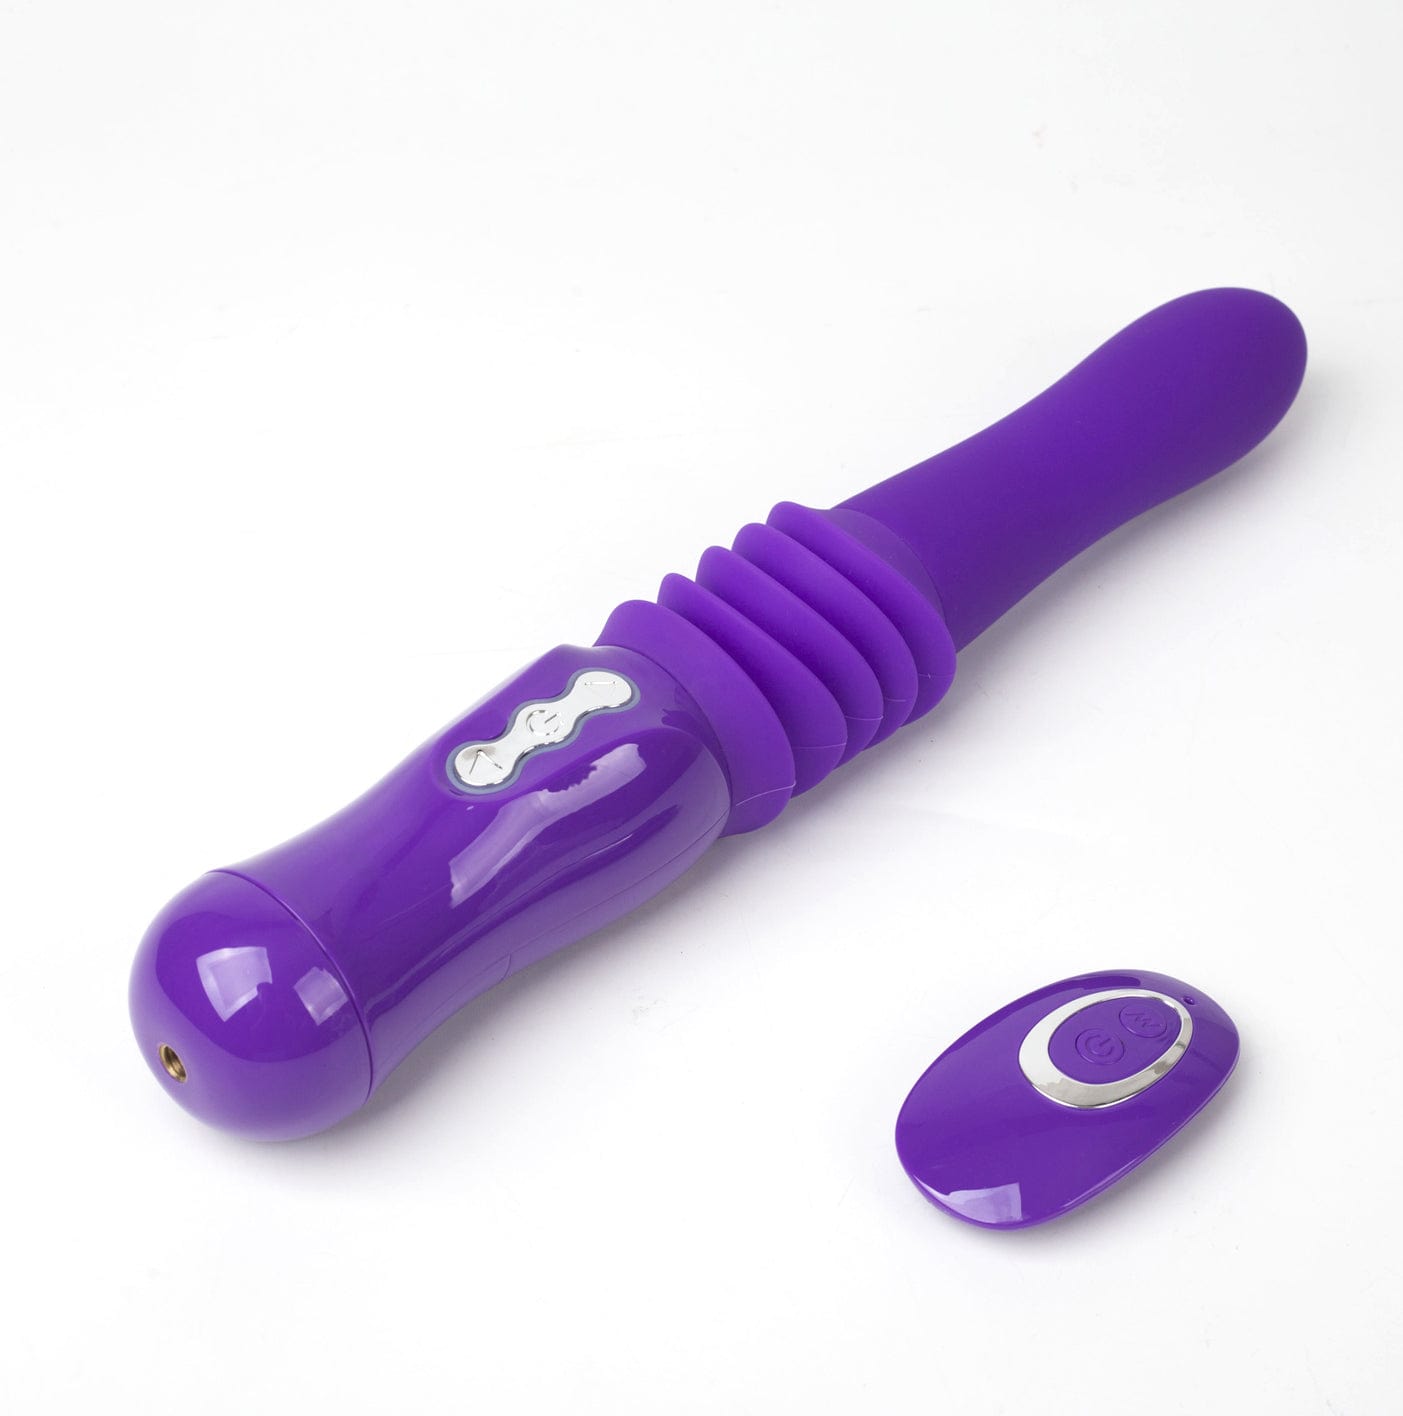 Maia Toys Thrusting Machine Purple Maia Toys MONROE USB Rechargeable Silicone Thrusting Portable Love Machine at the Haus of Shag